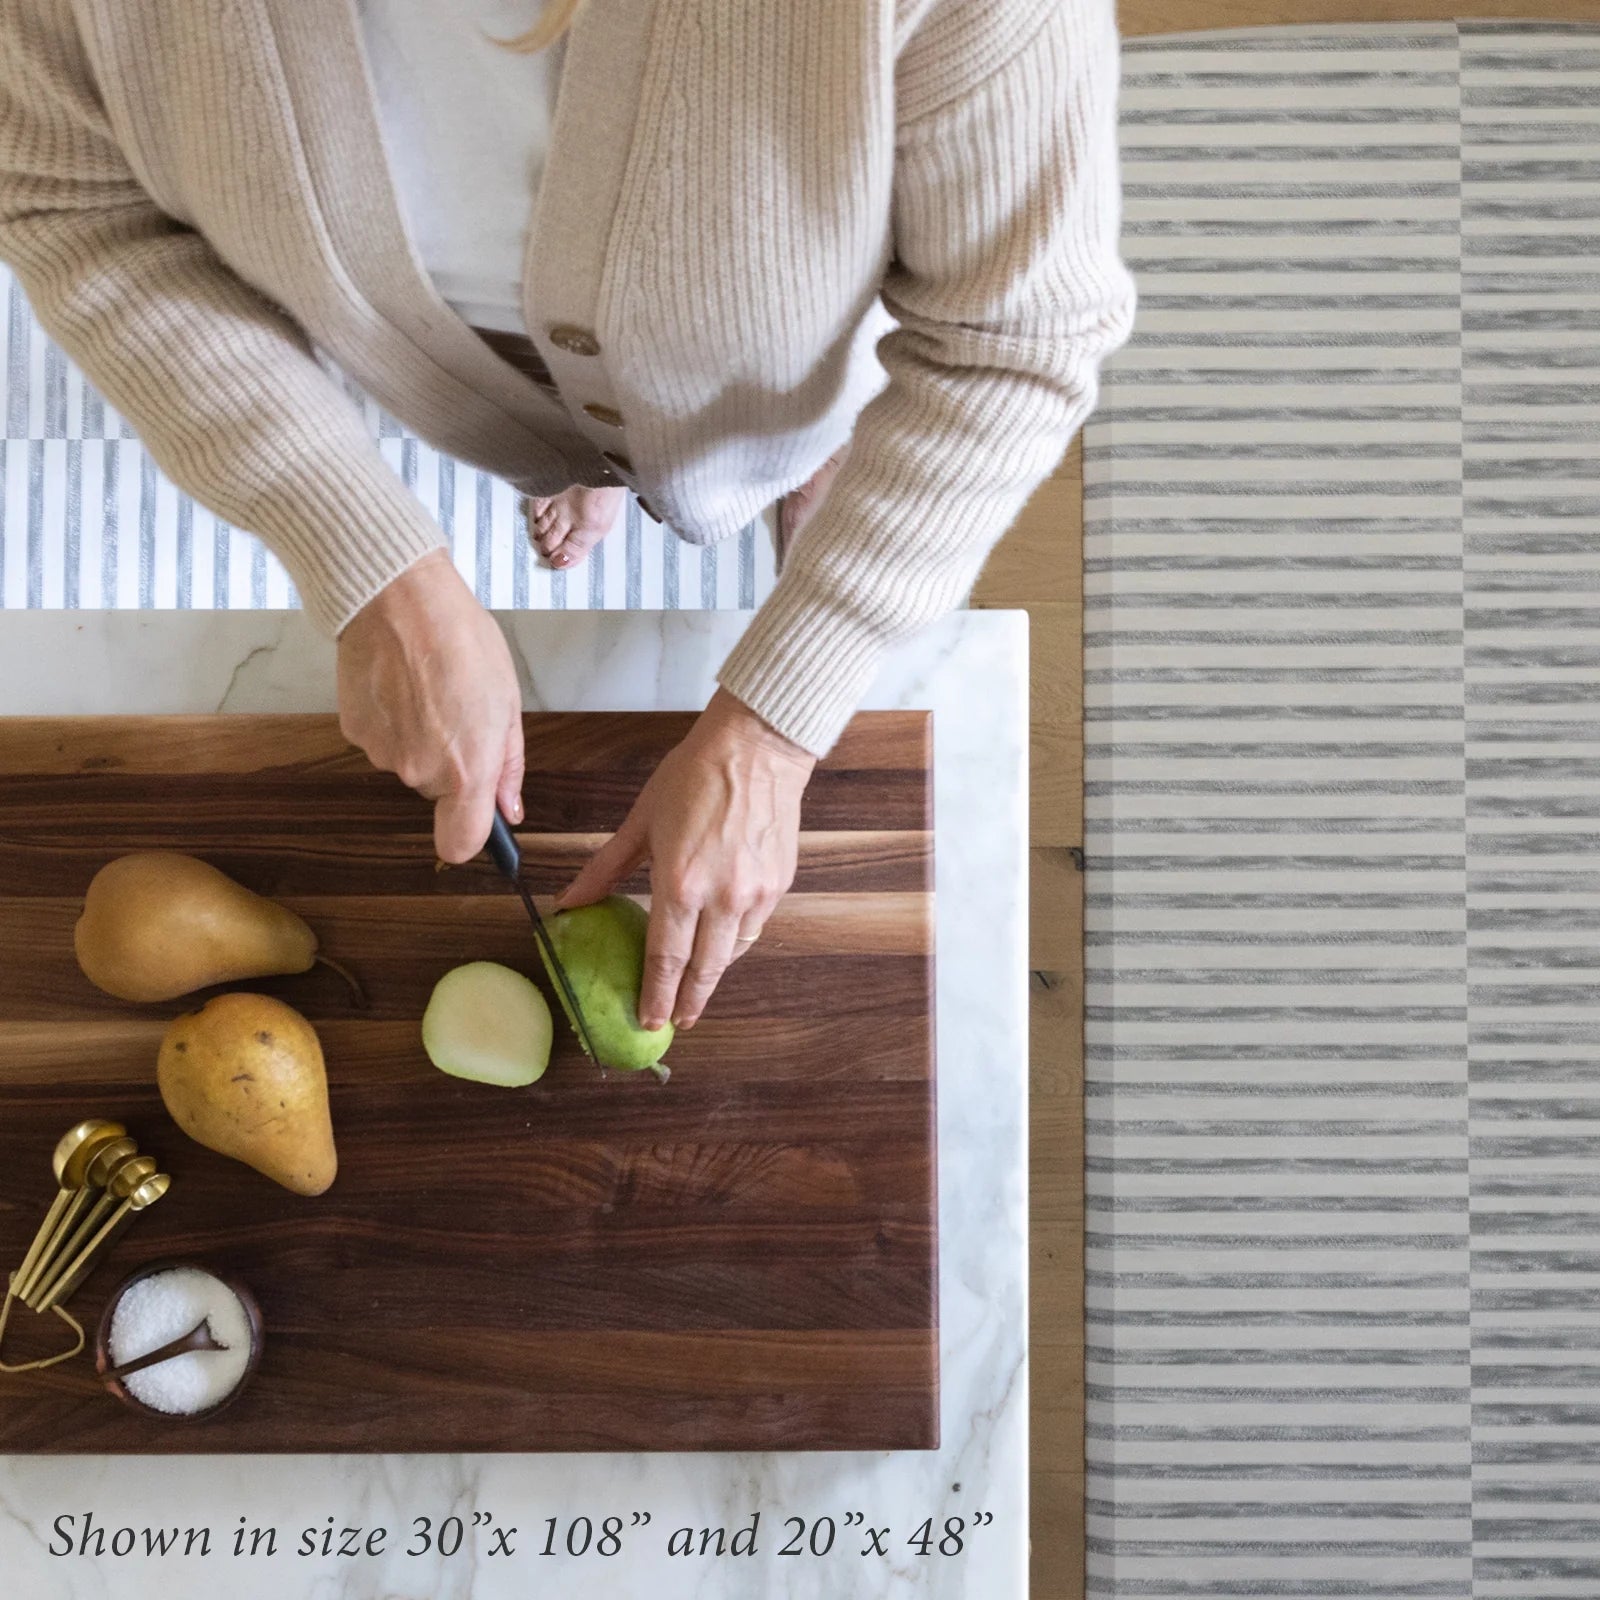 Reese pewter gray and white inverted stripe standing mat shown from above in kitchen in sizes 20x48 and 30x108 with woman cutting pears